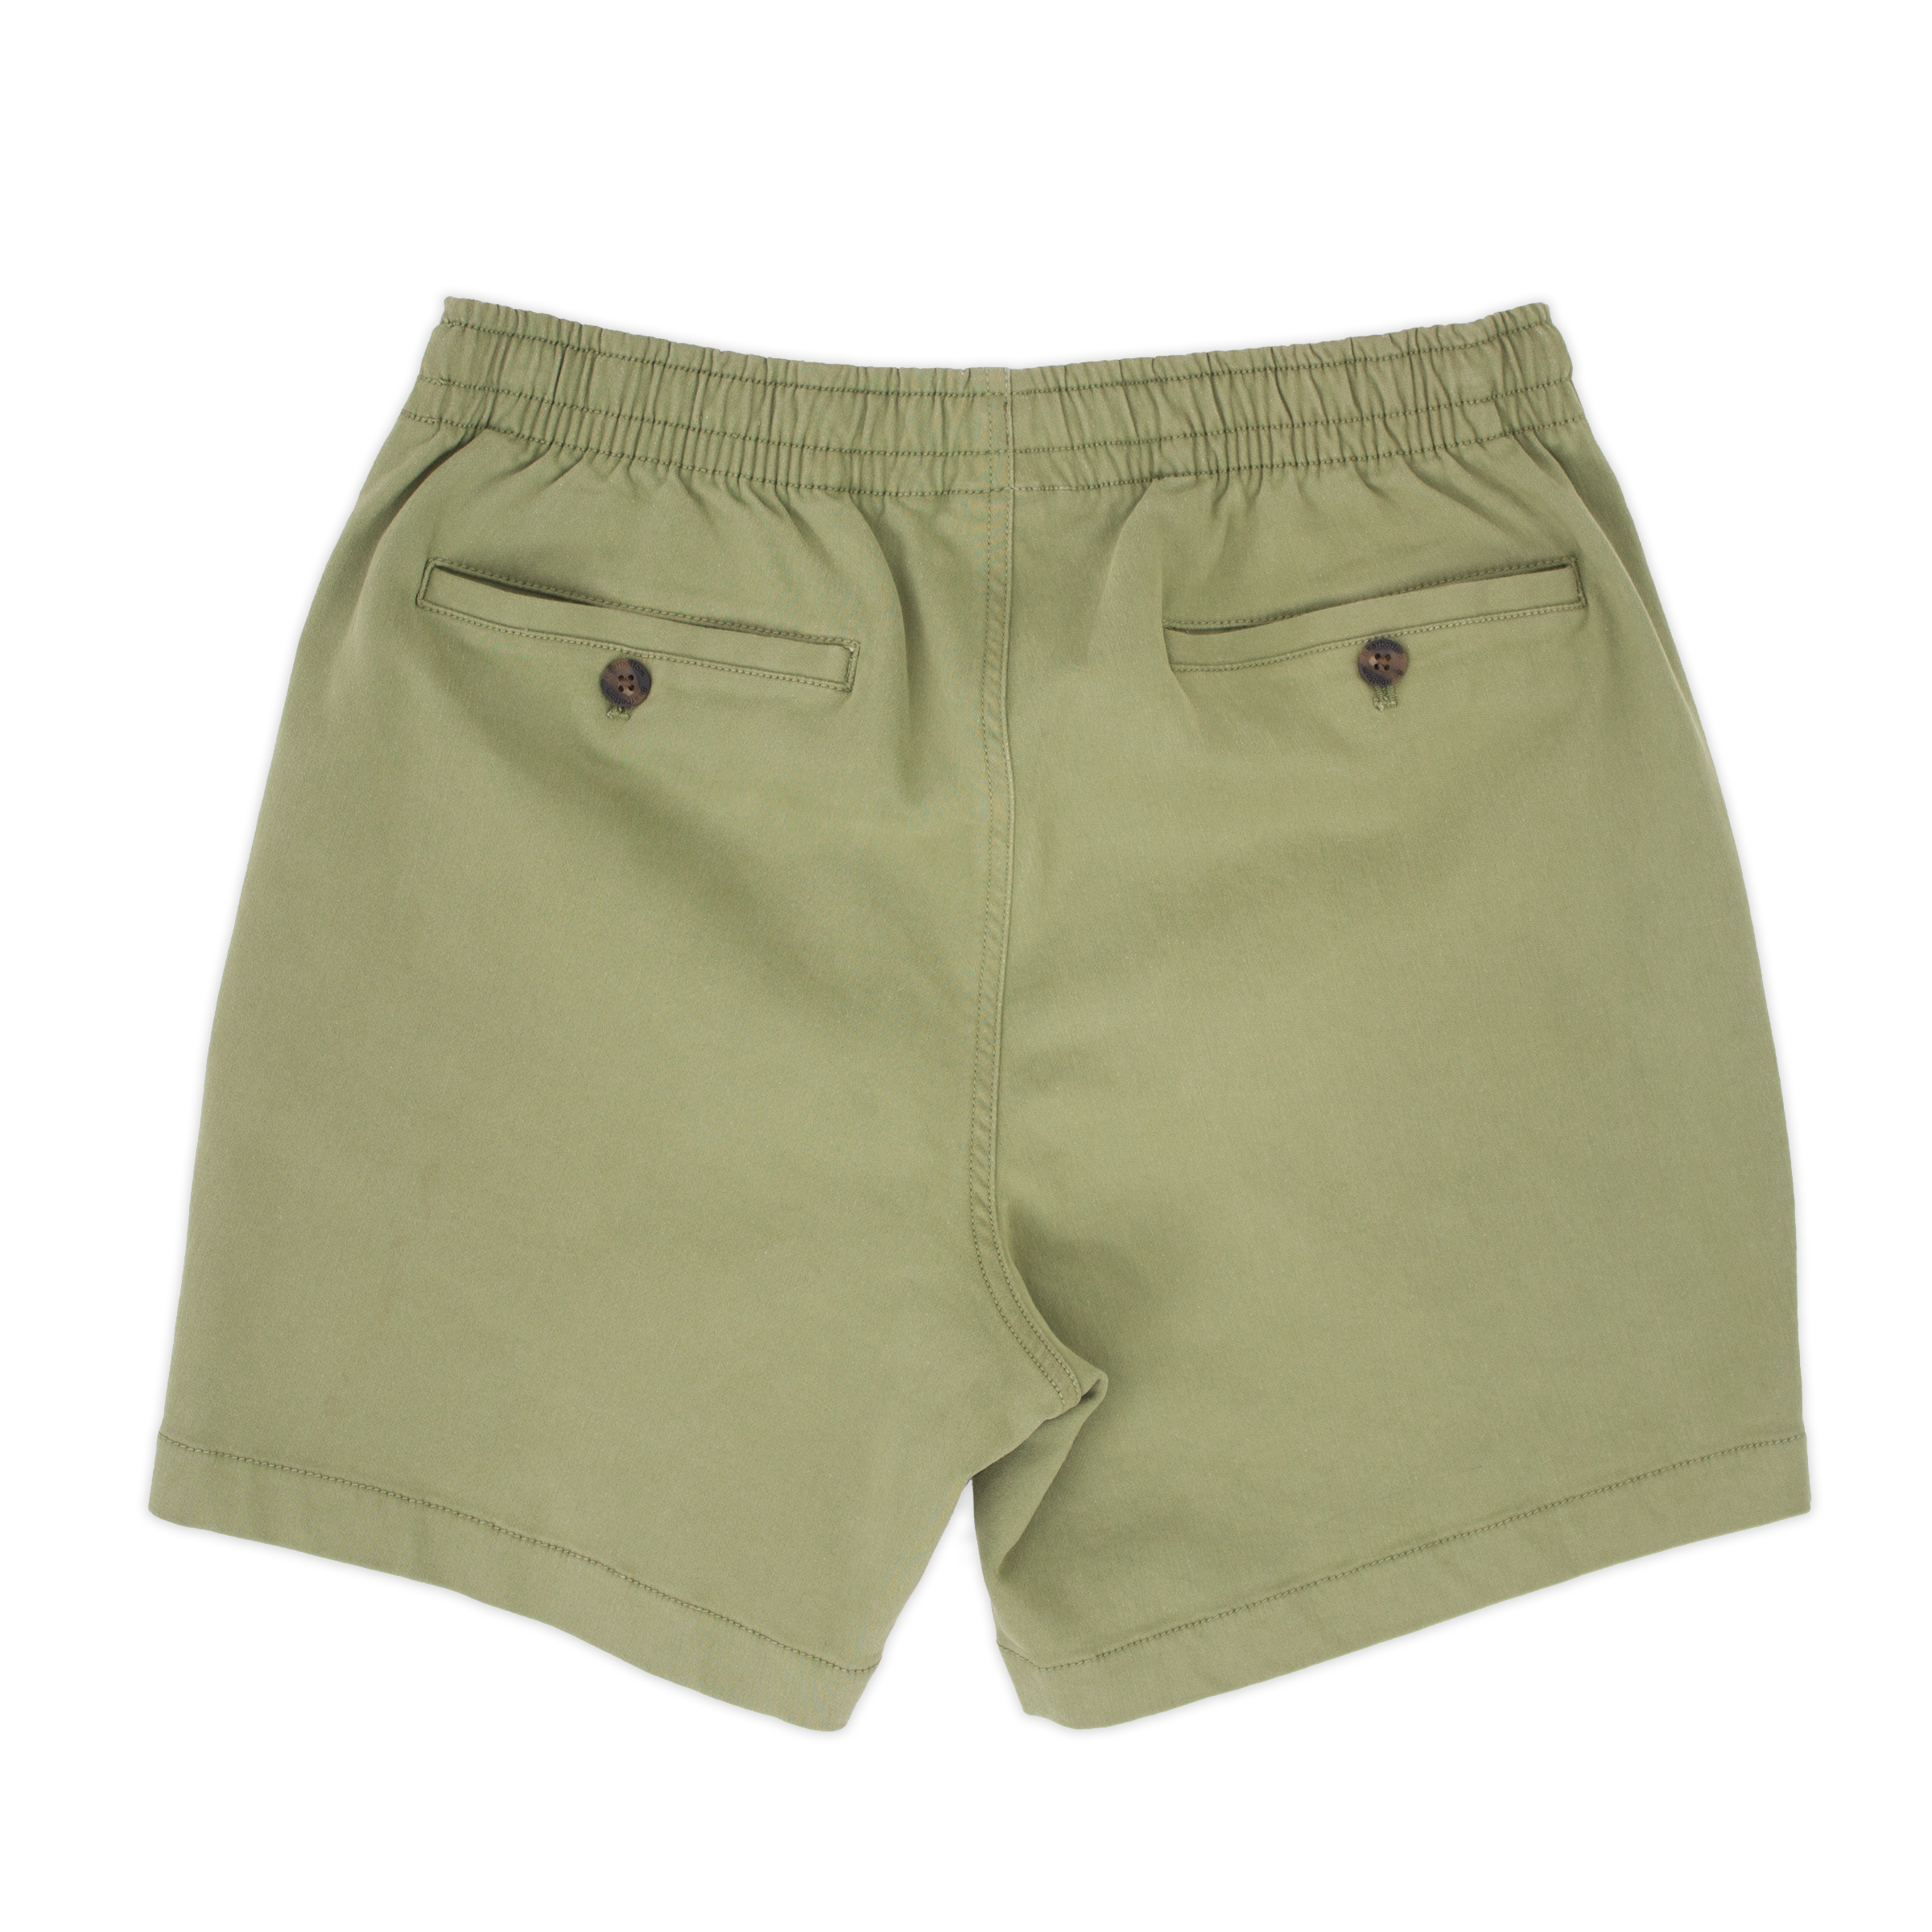 Alto Short 5.5" inseam in Olive back with elastic waistband and two welt pocket with horn buttons